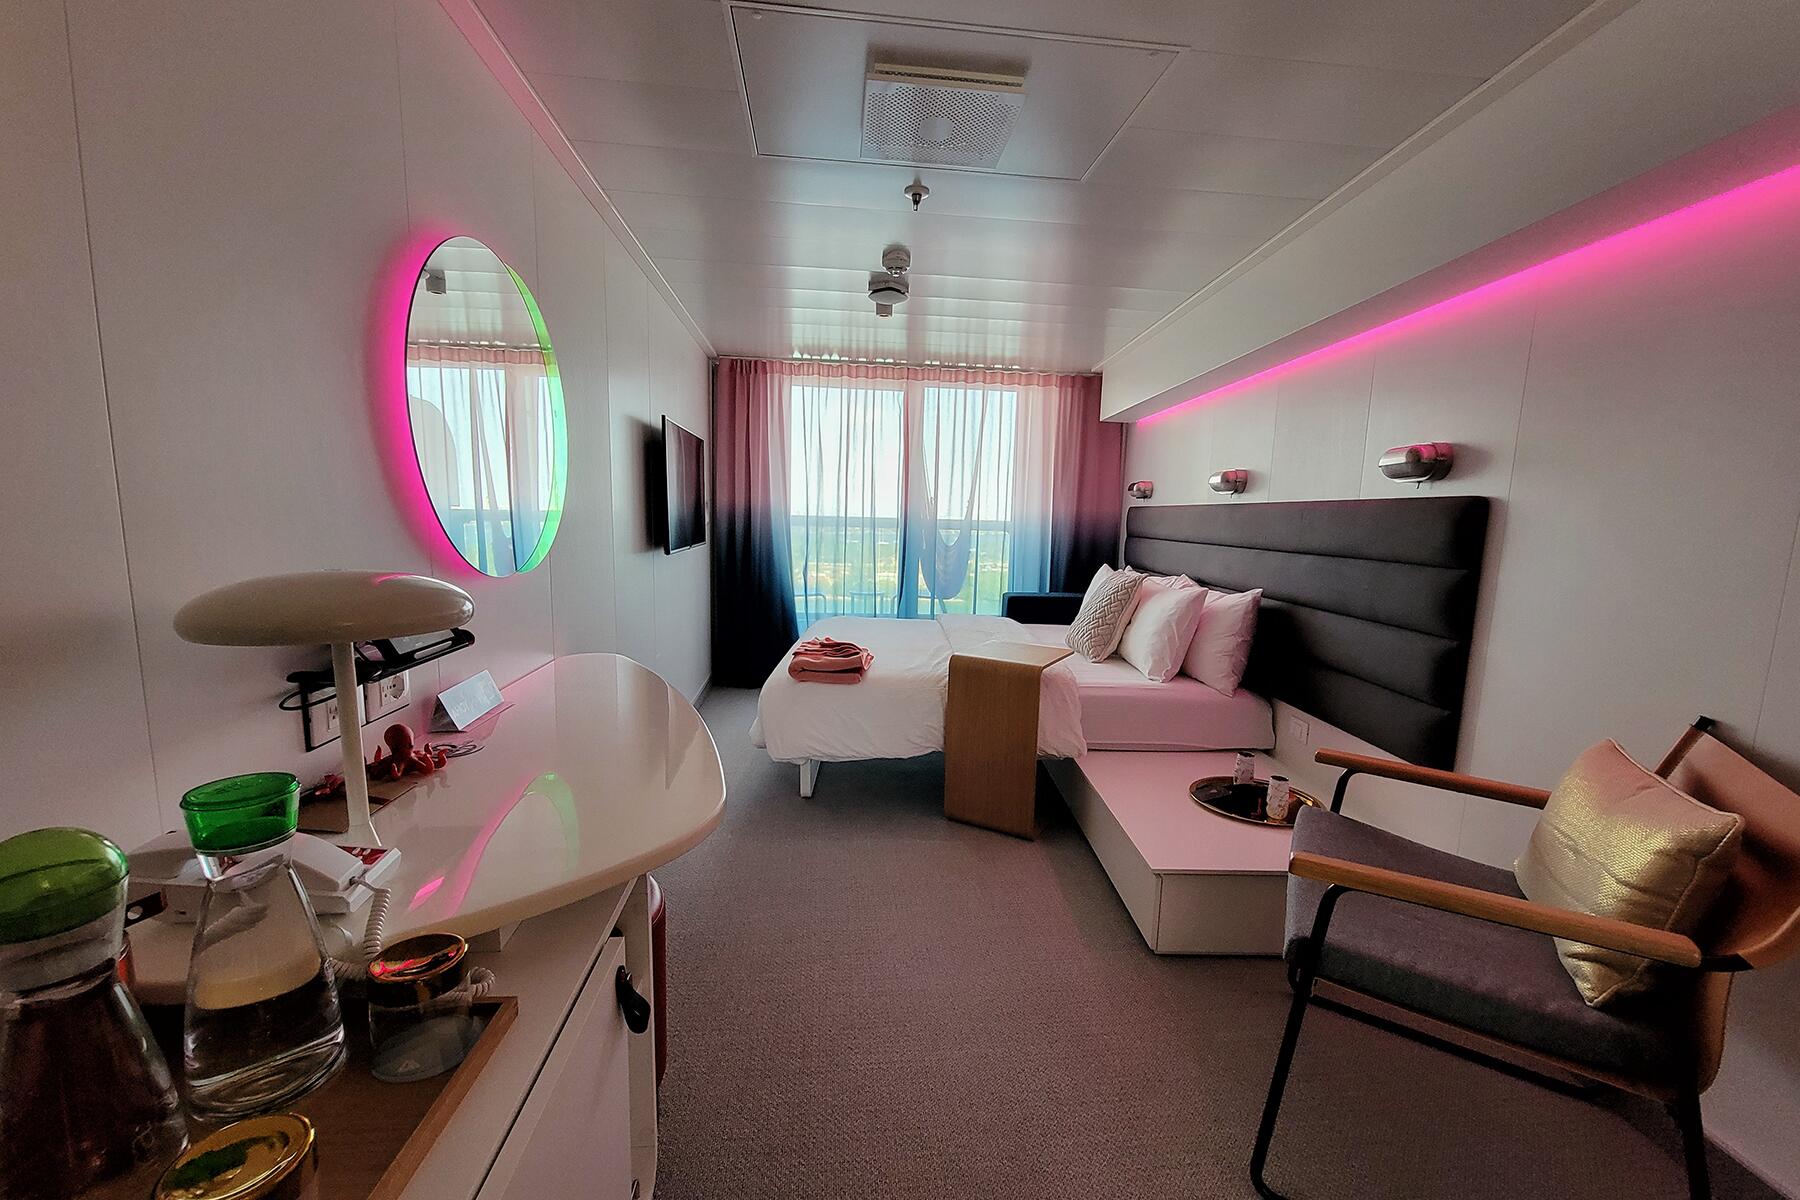 Cruise Review Virgin Voyages Scarlet Lady image